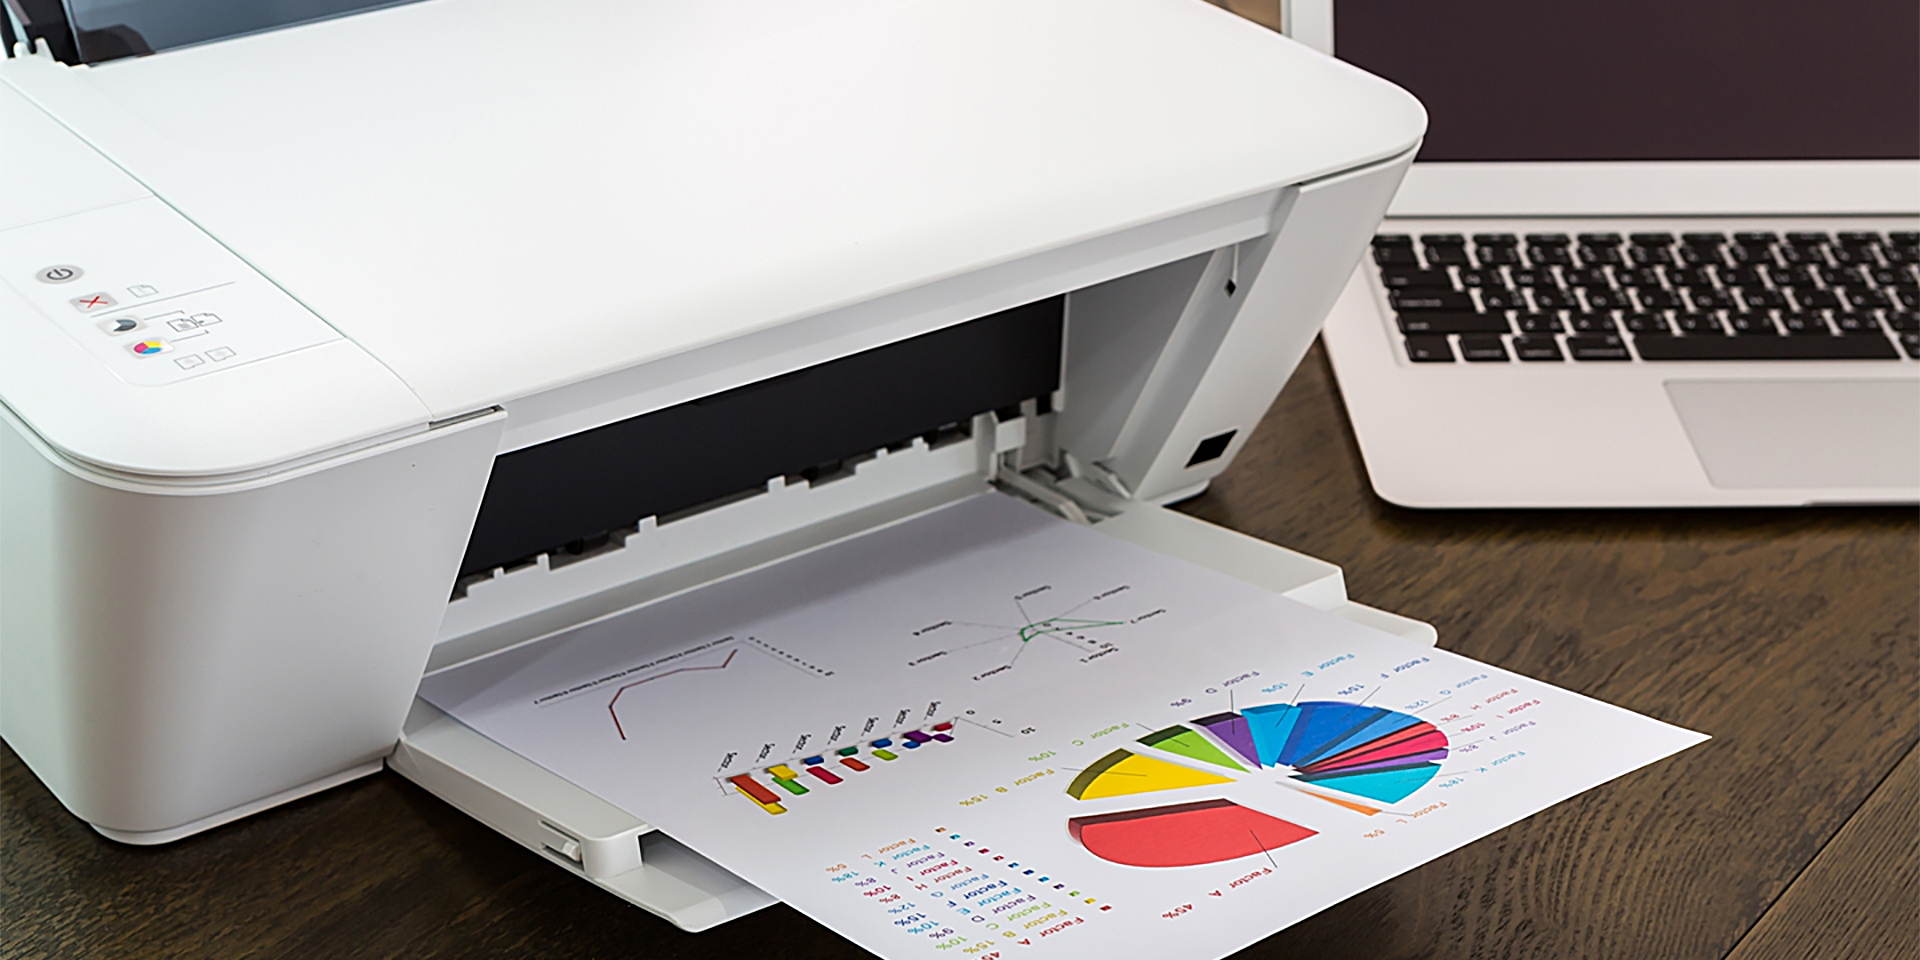 How to Print Double-Sided on a Mac With Any Printer